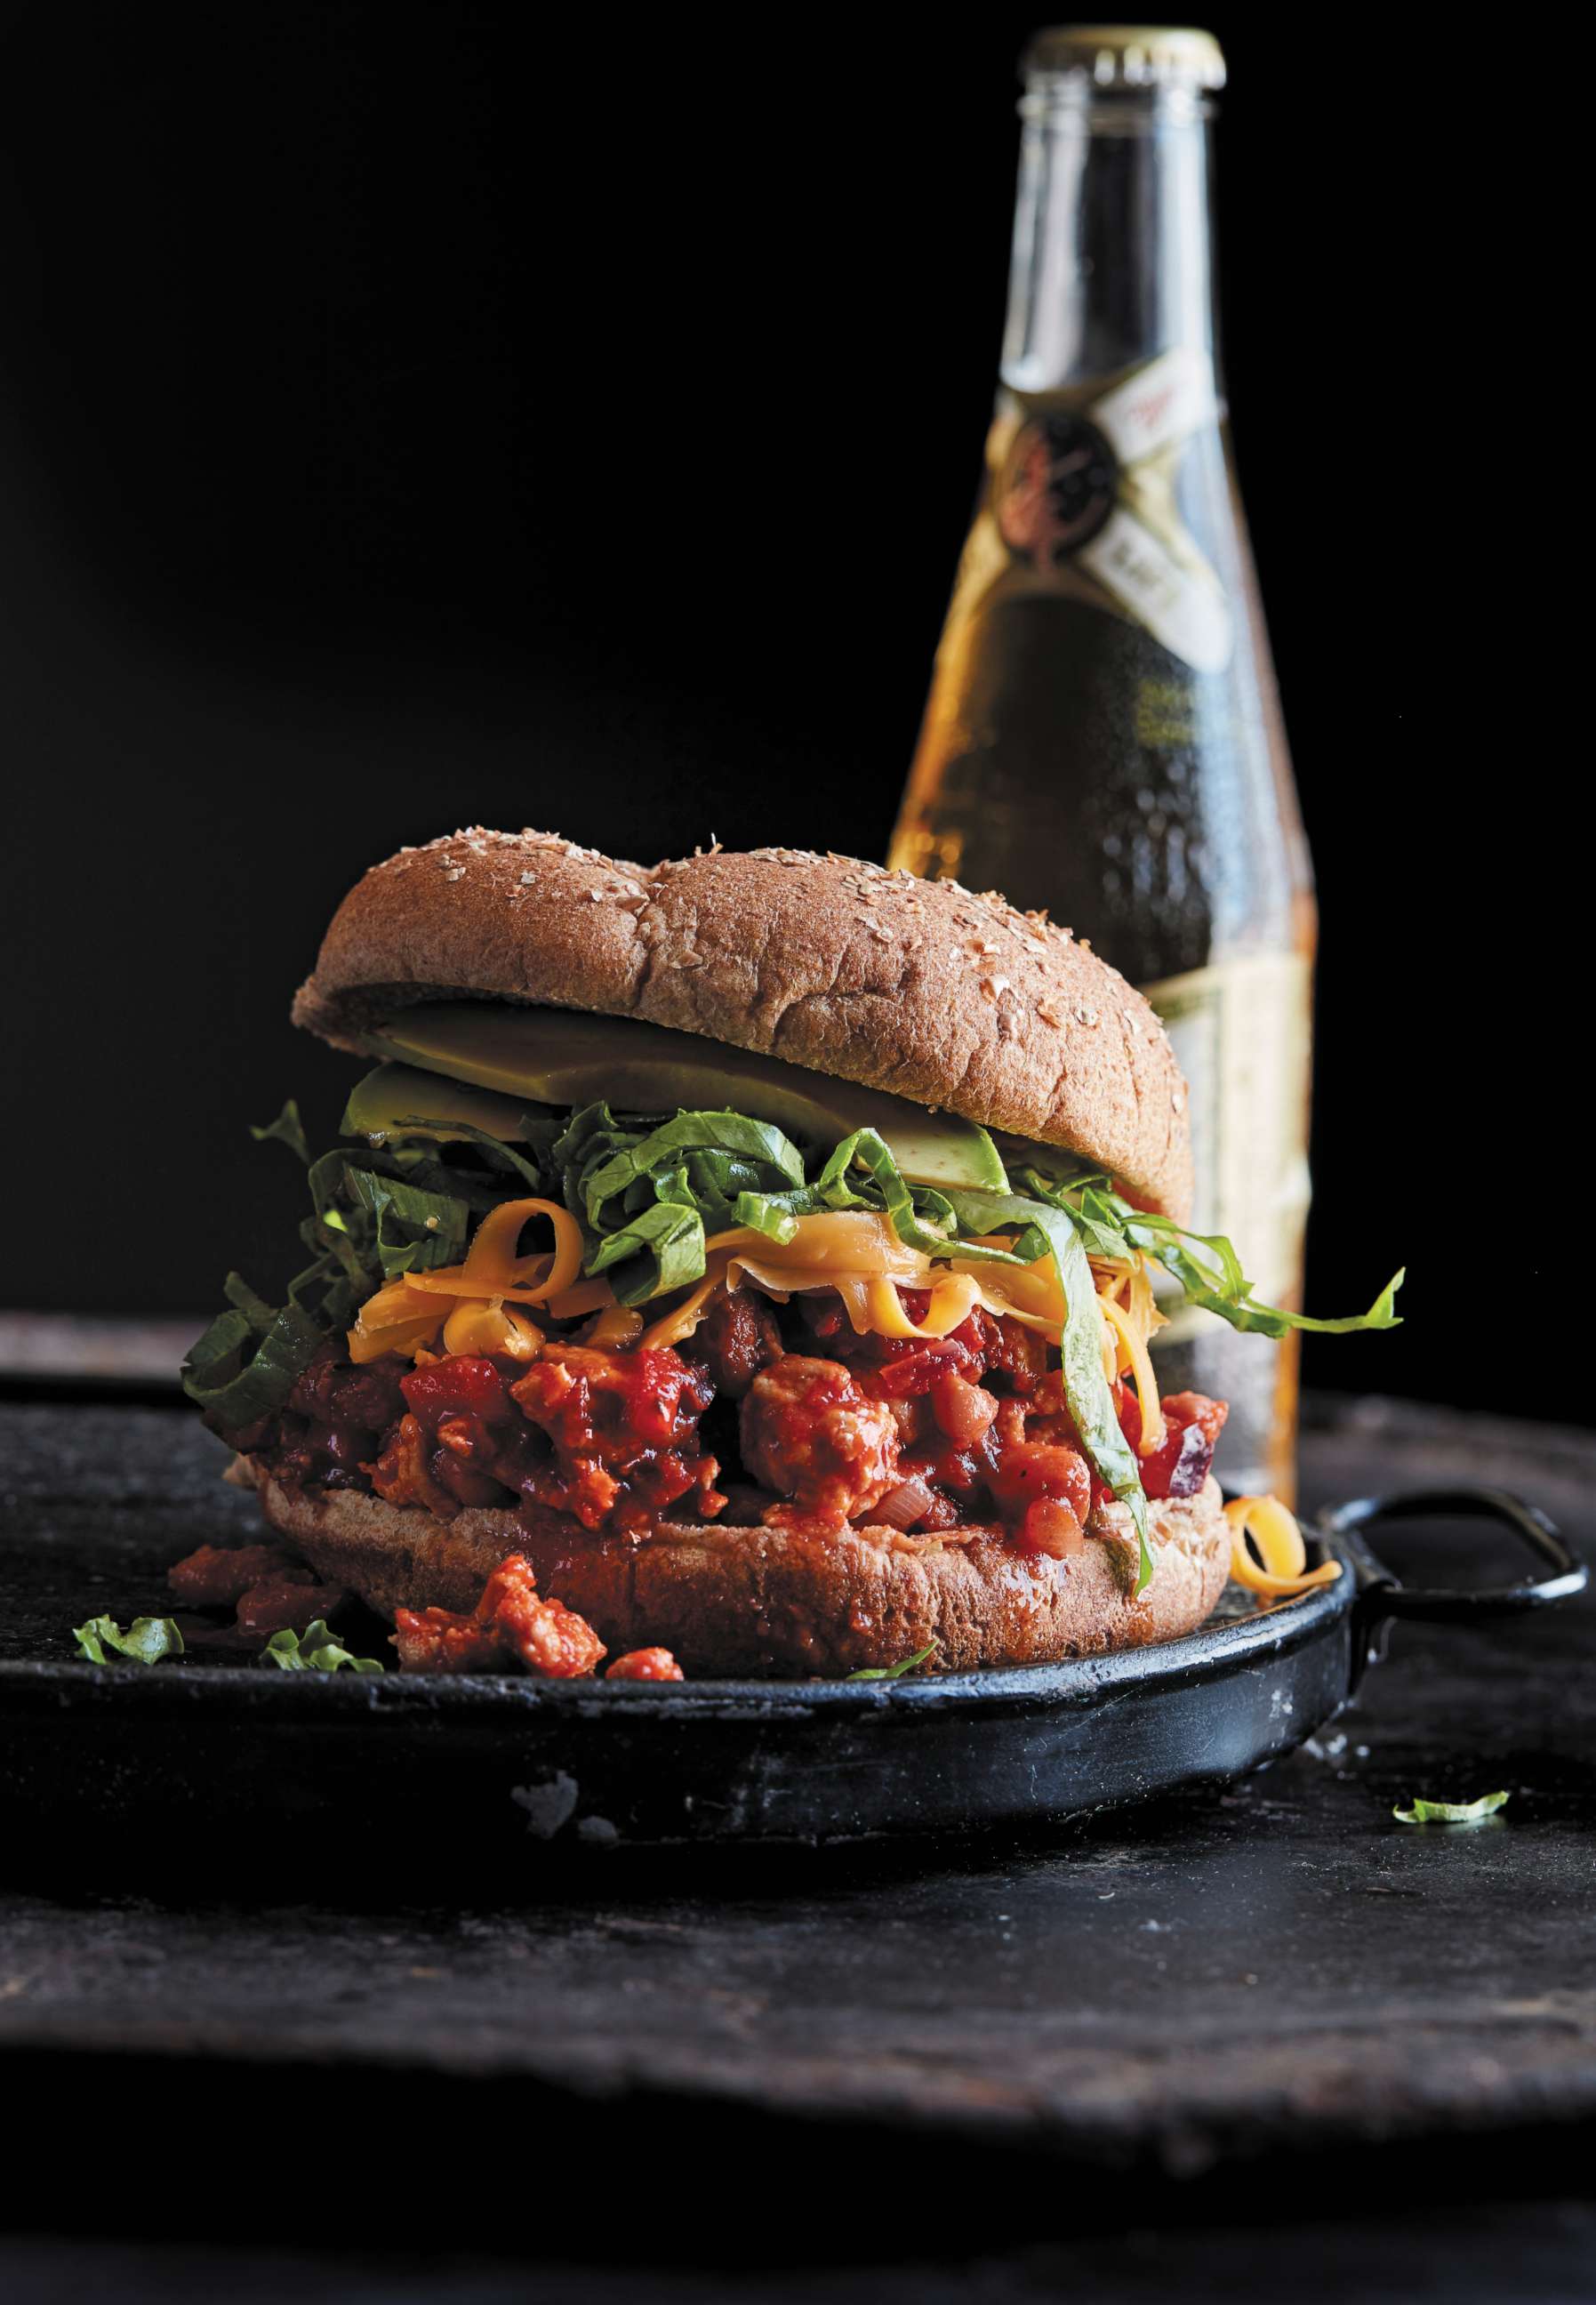 PHOTO: Ultimate Sloppy Joe from chef Serena Wolf